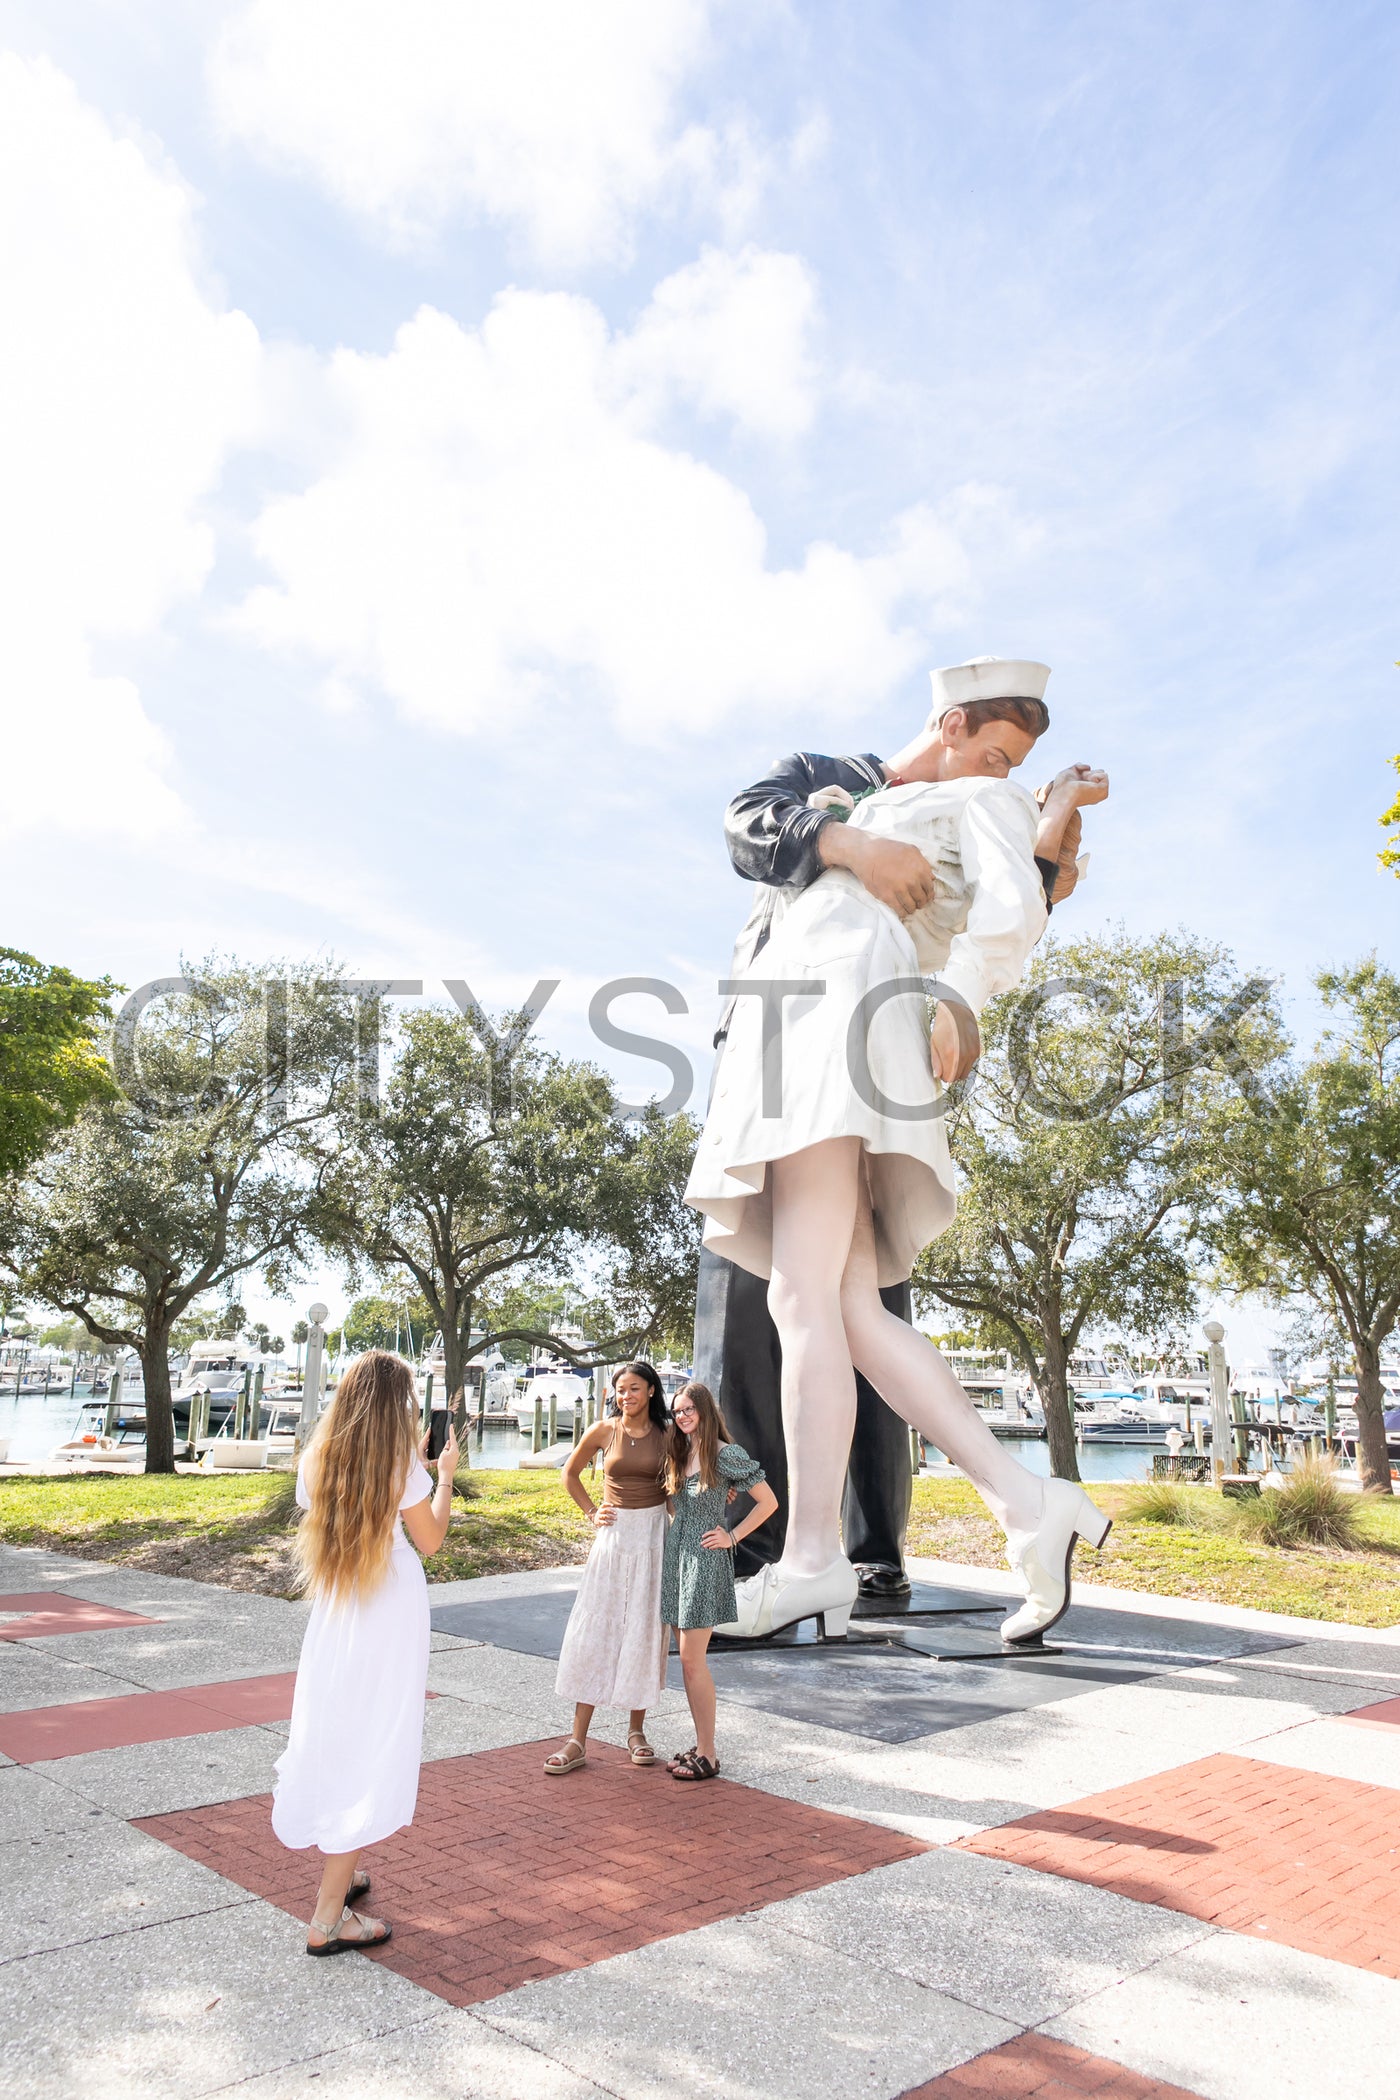 Tourists capturing moments at iconic Sarasota WWII statue